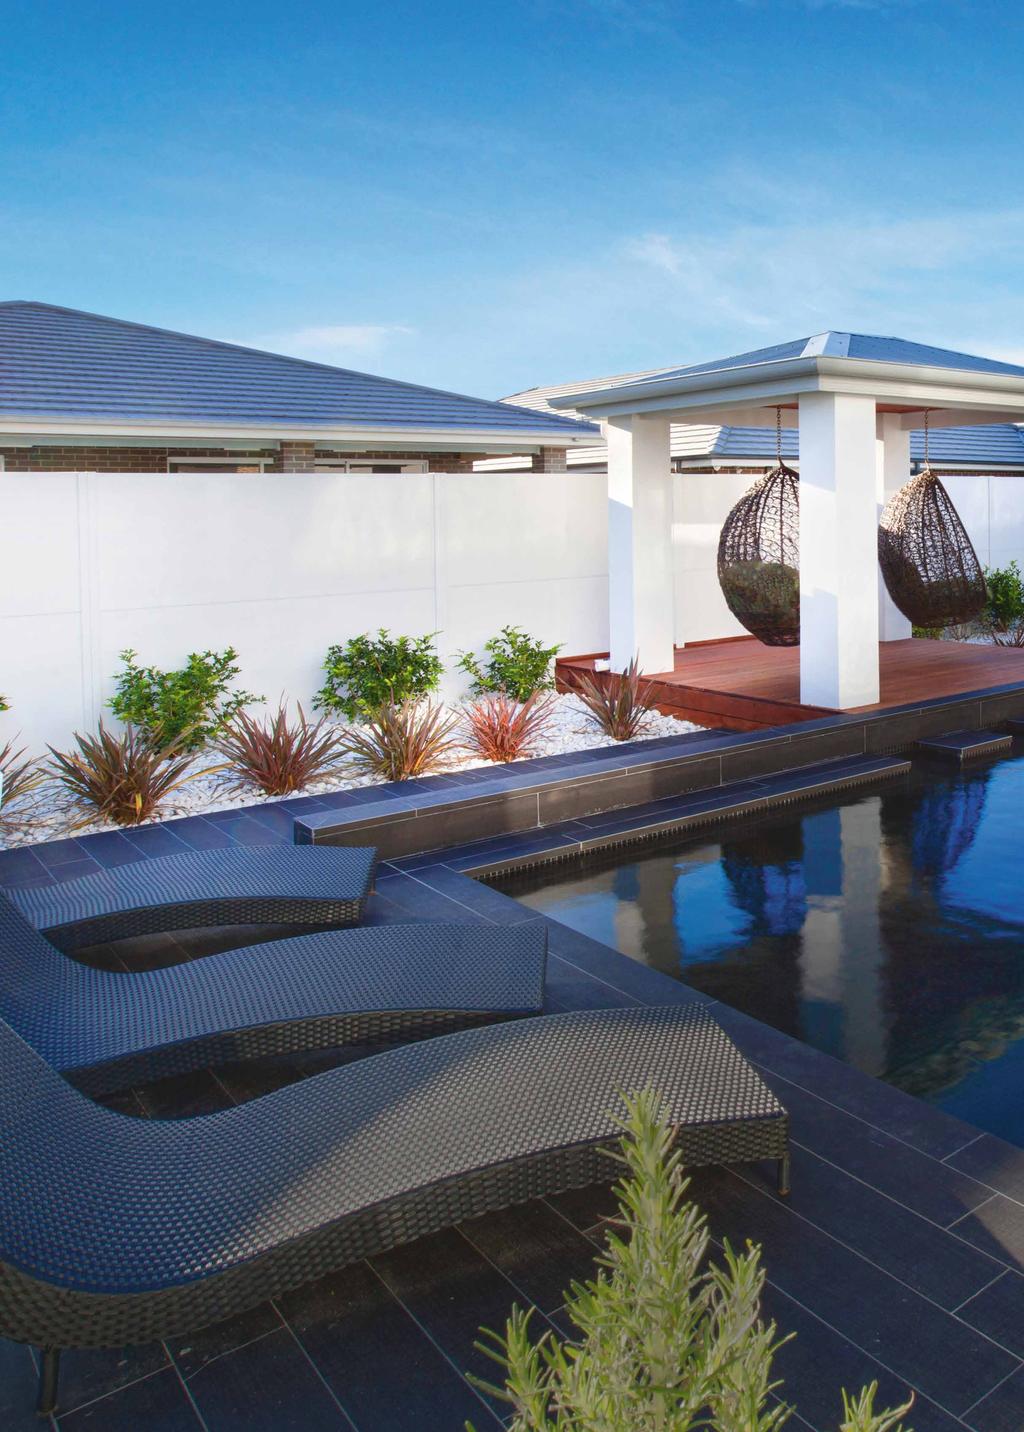 SlimWall Our most cost-effective wall SlimWall boundary wall for pool area